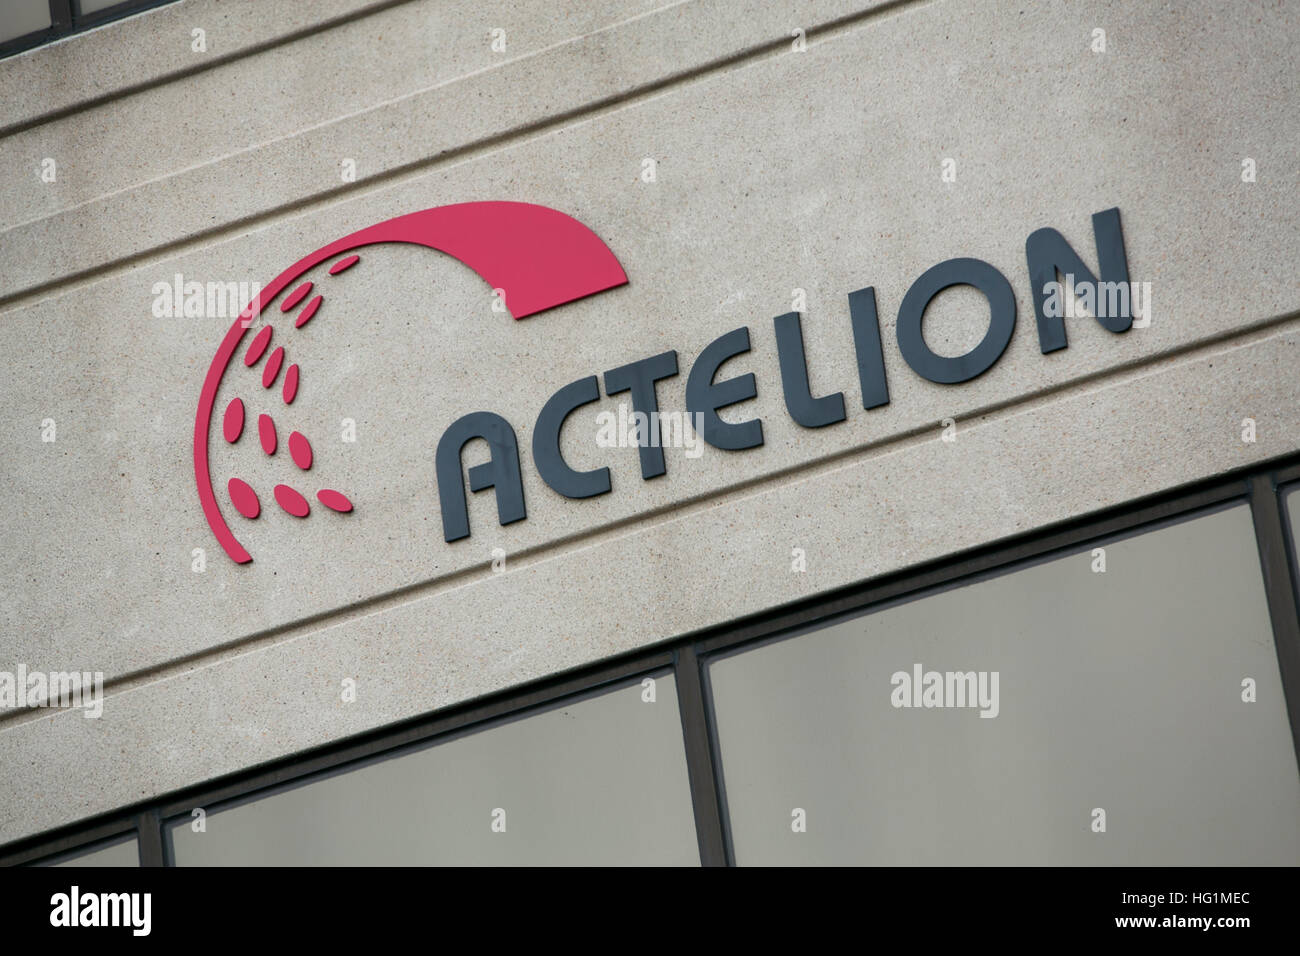 A logo sign outside of a facility occupied by Actelion Pharmaceuticals Ltd., in Cherry Hill, New Jersey on December 11, 2016. Stock Photo